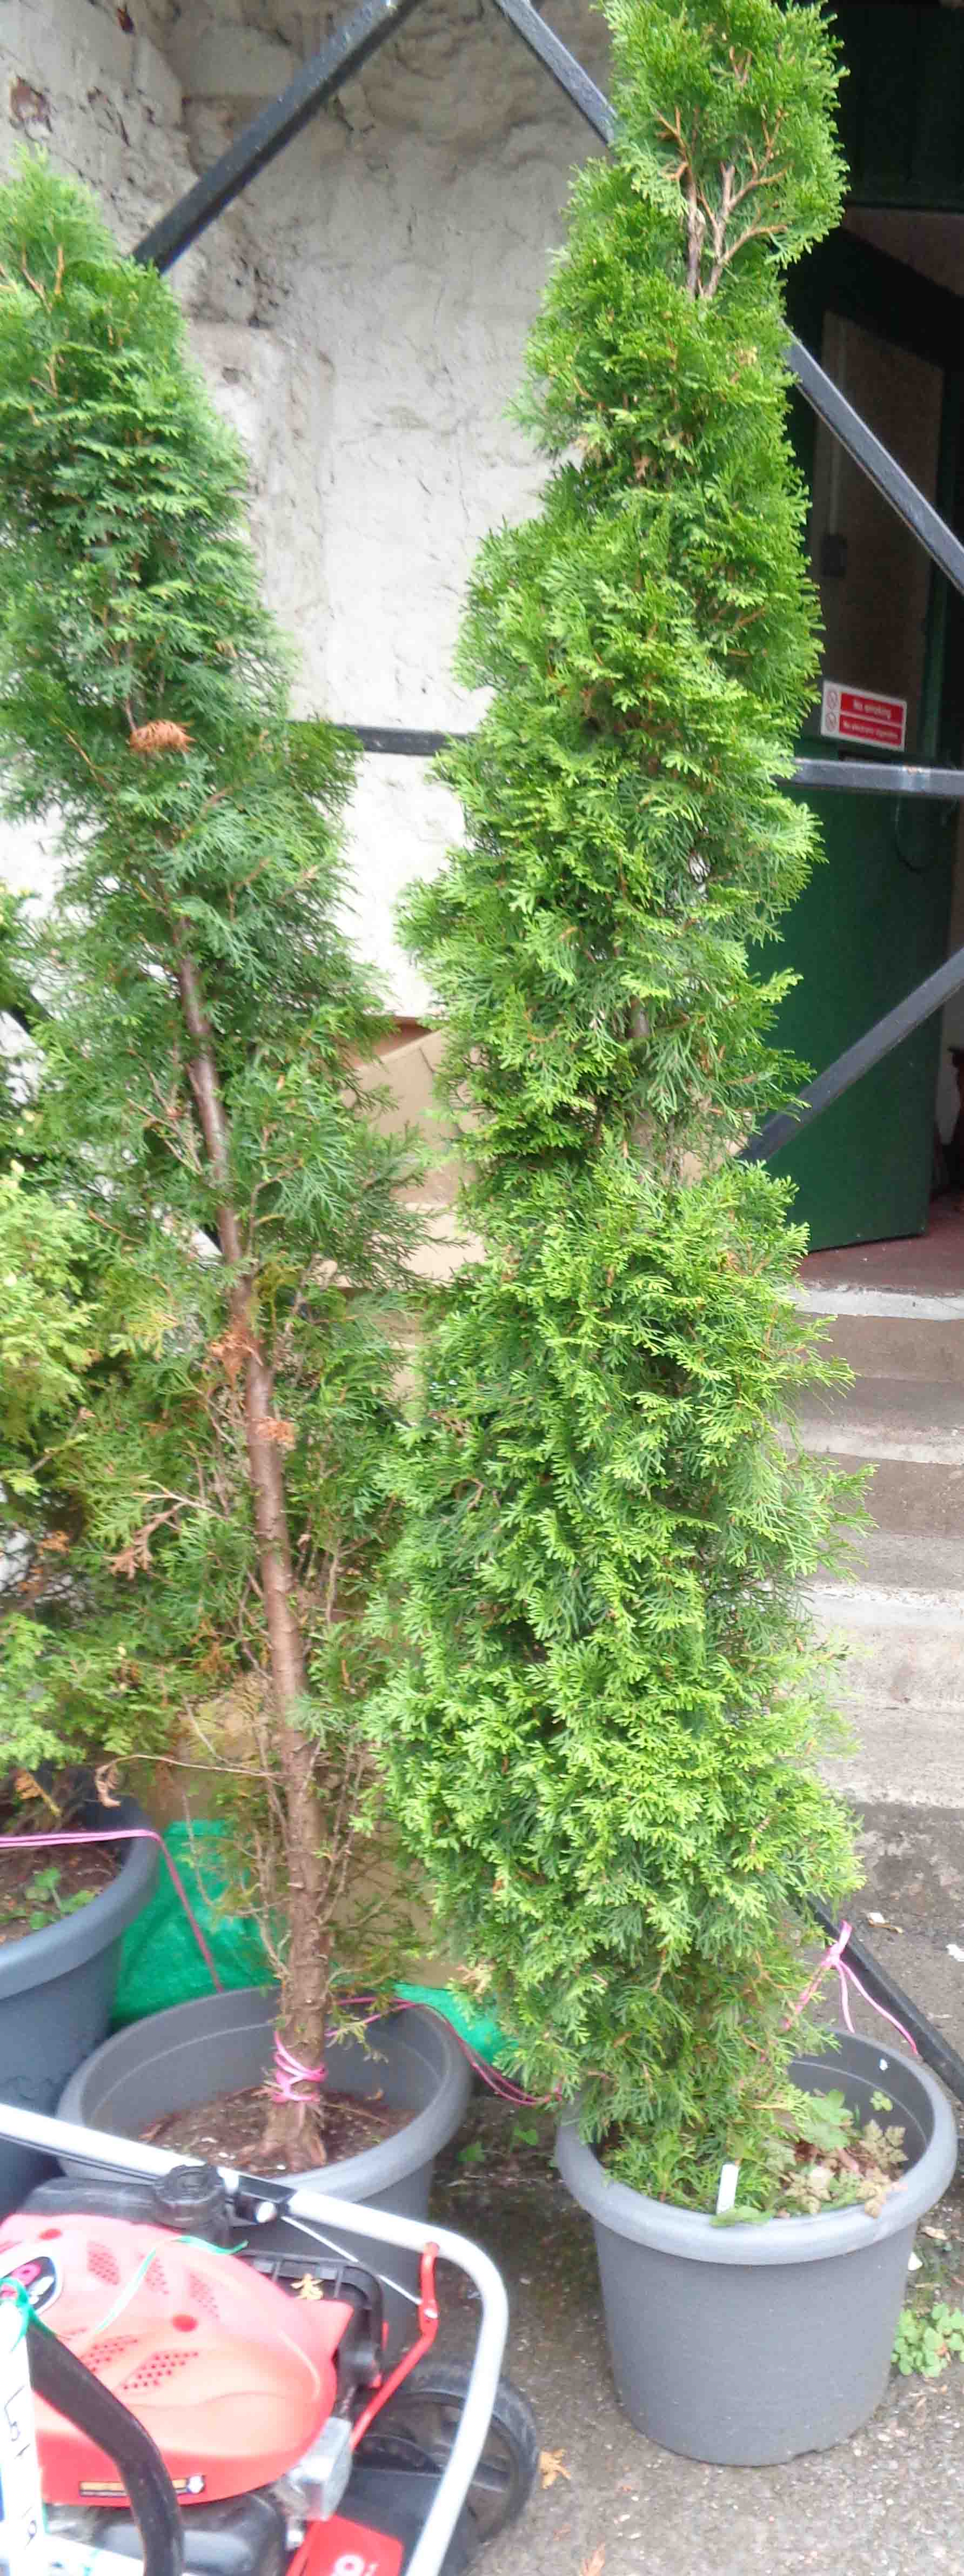 Two similar tall evergreen trees, both planted in plastic pots